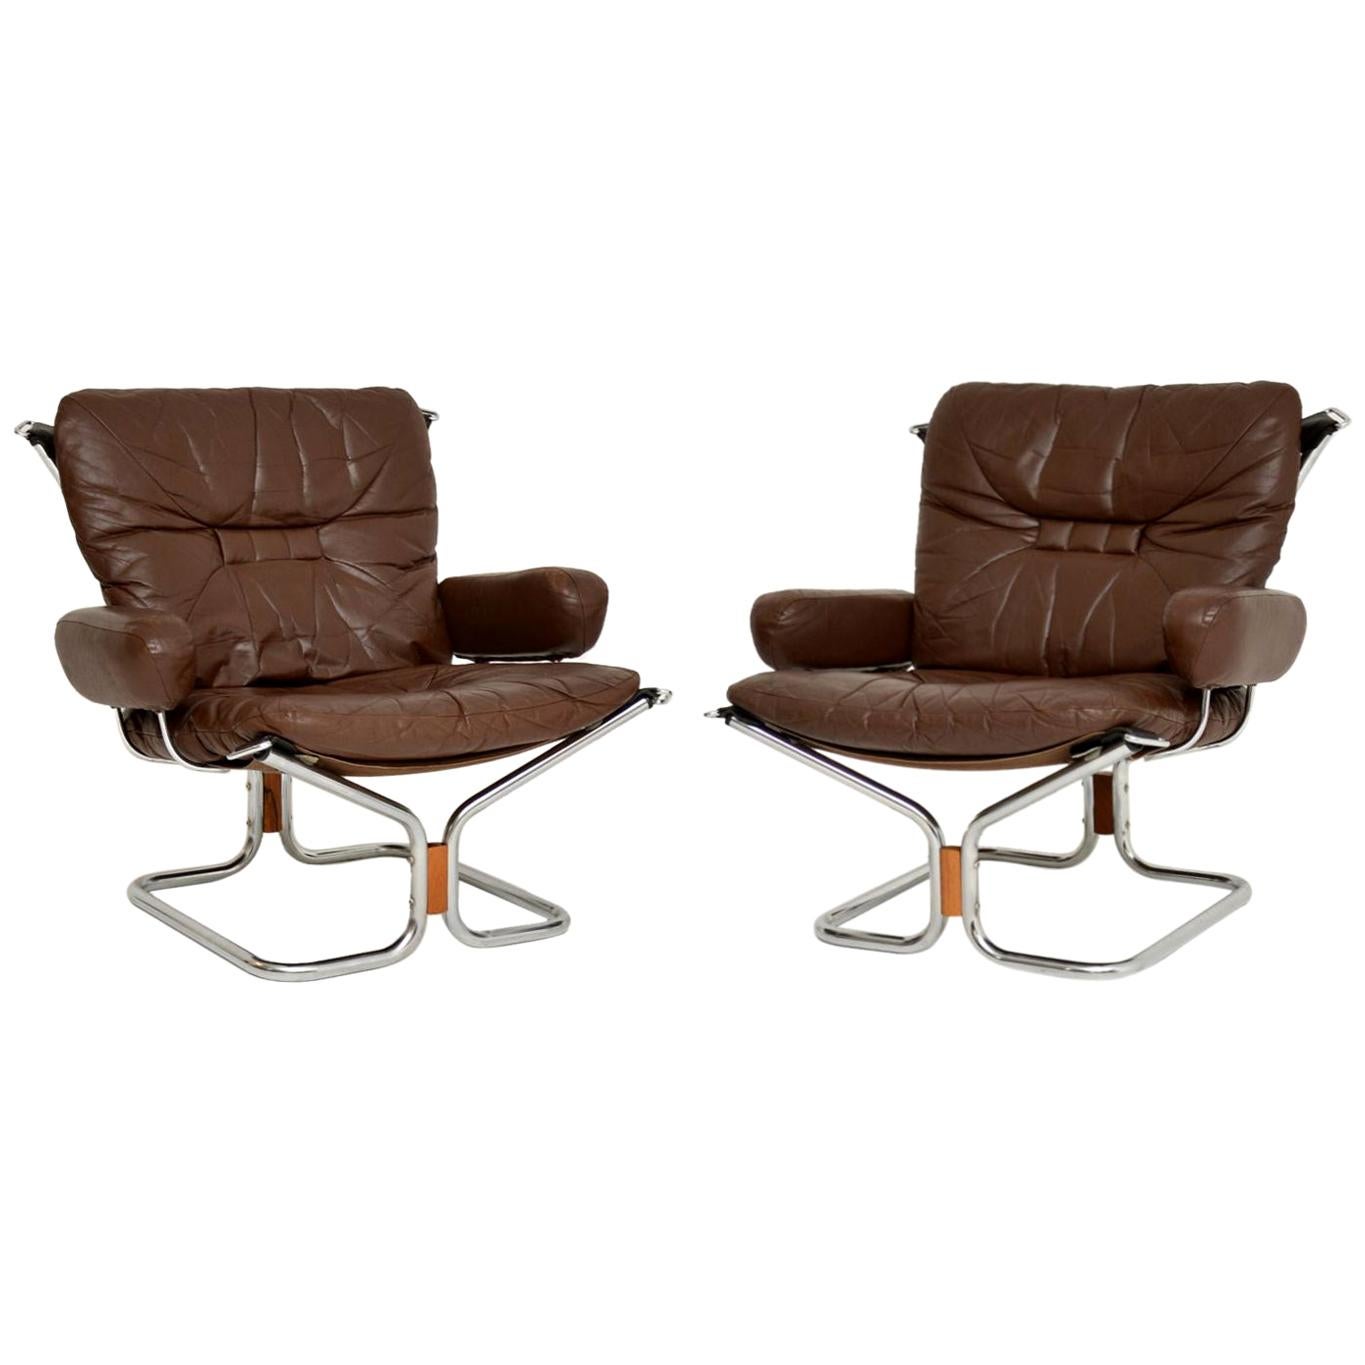 1960s Pair of Leather and Chrome Armchairs by Ingmar Relling